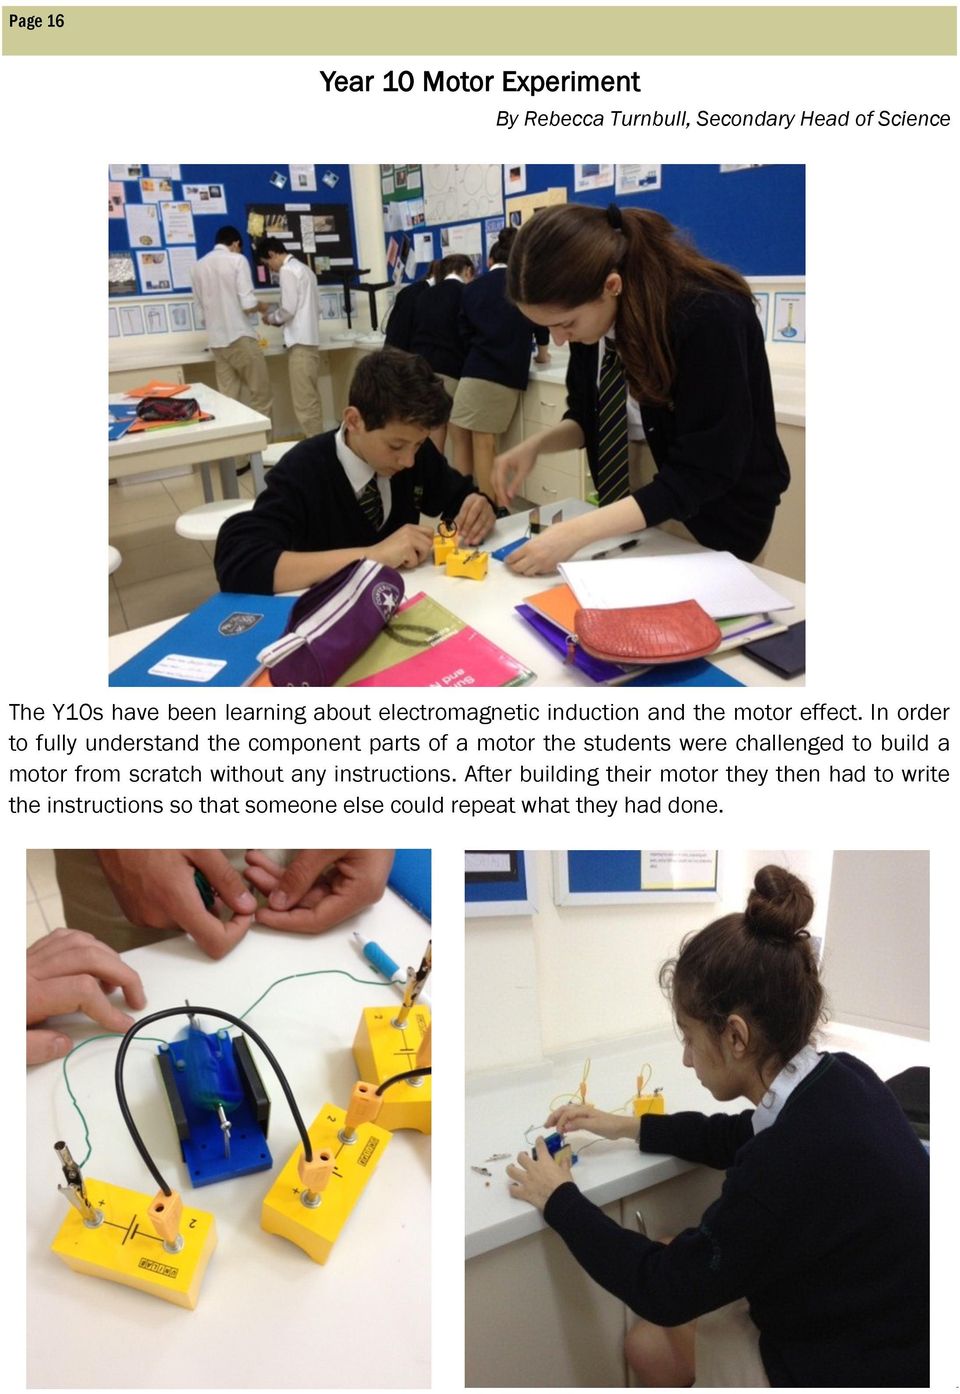 In order to fully understand the component parts of a motor the students were challenged to build a motor